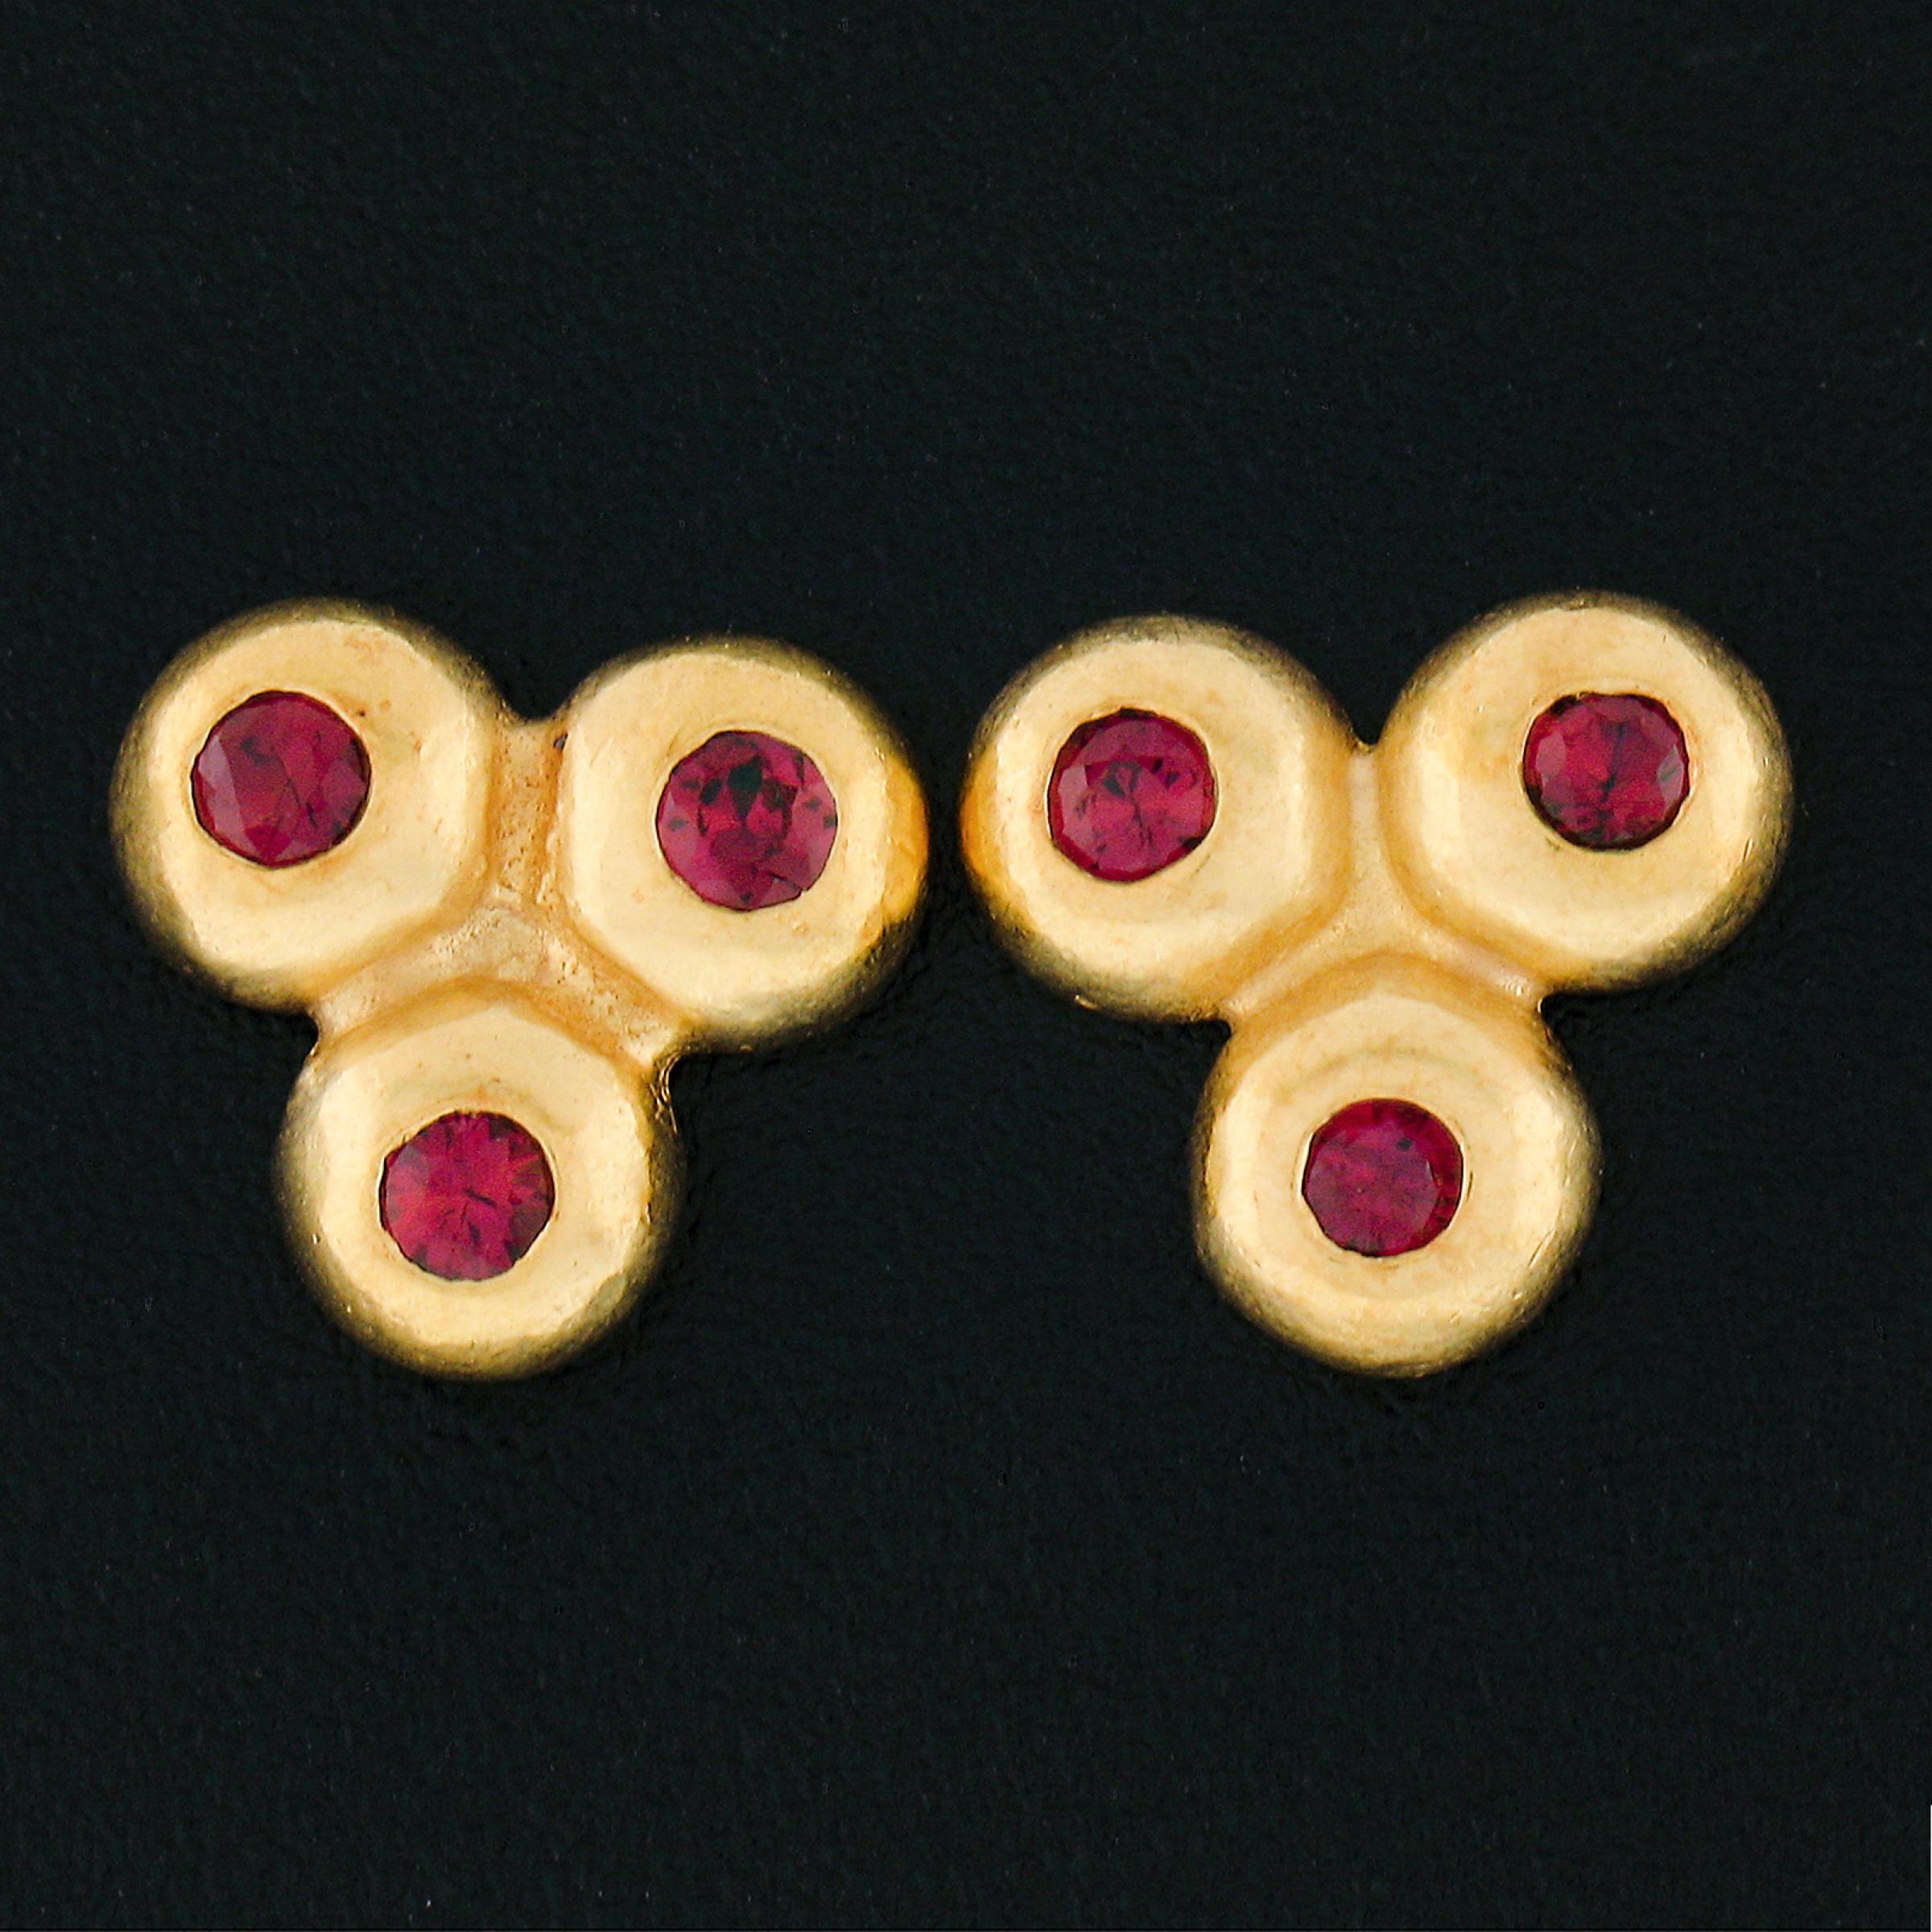 Here we have a lovely pair of stud earrings that are crafted from solid 18k yellow gold. The earrings each feature a cluster of 3 bezel set natural ruby stones. The round brilliant cut rubies are well matched with a gorgeous vivid red color, and